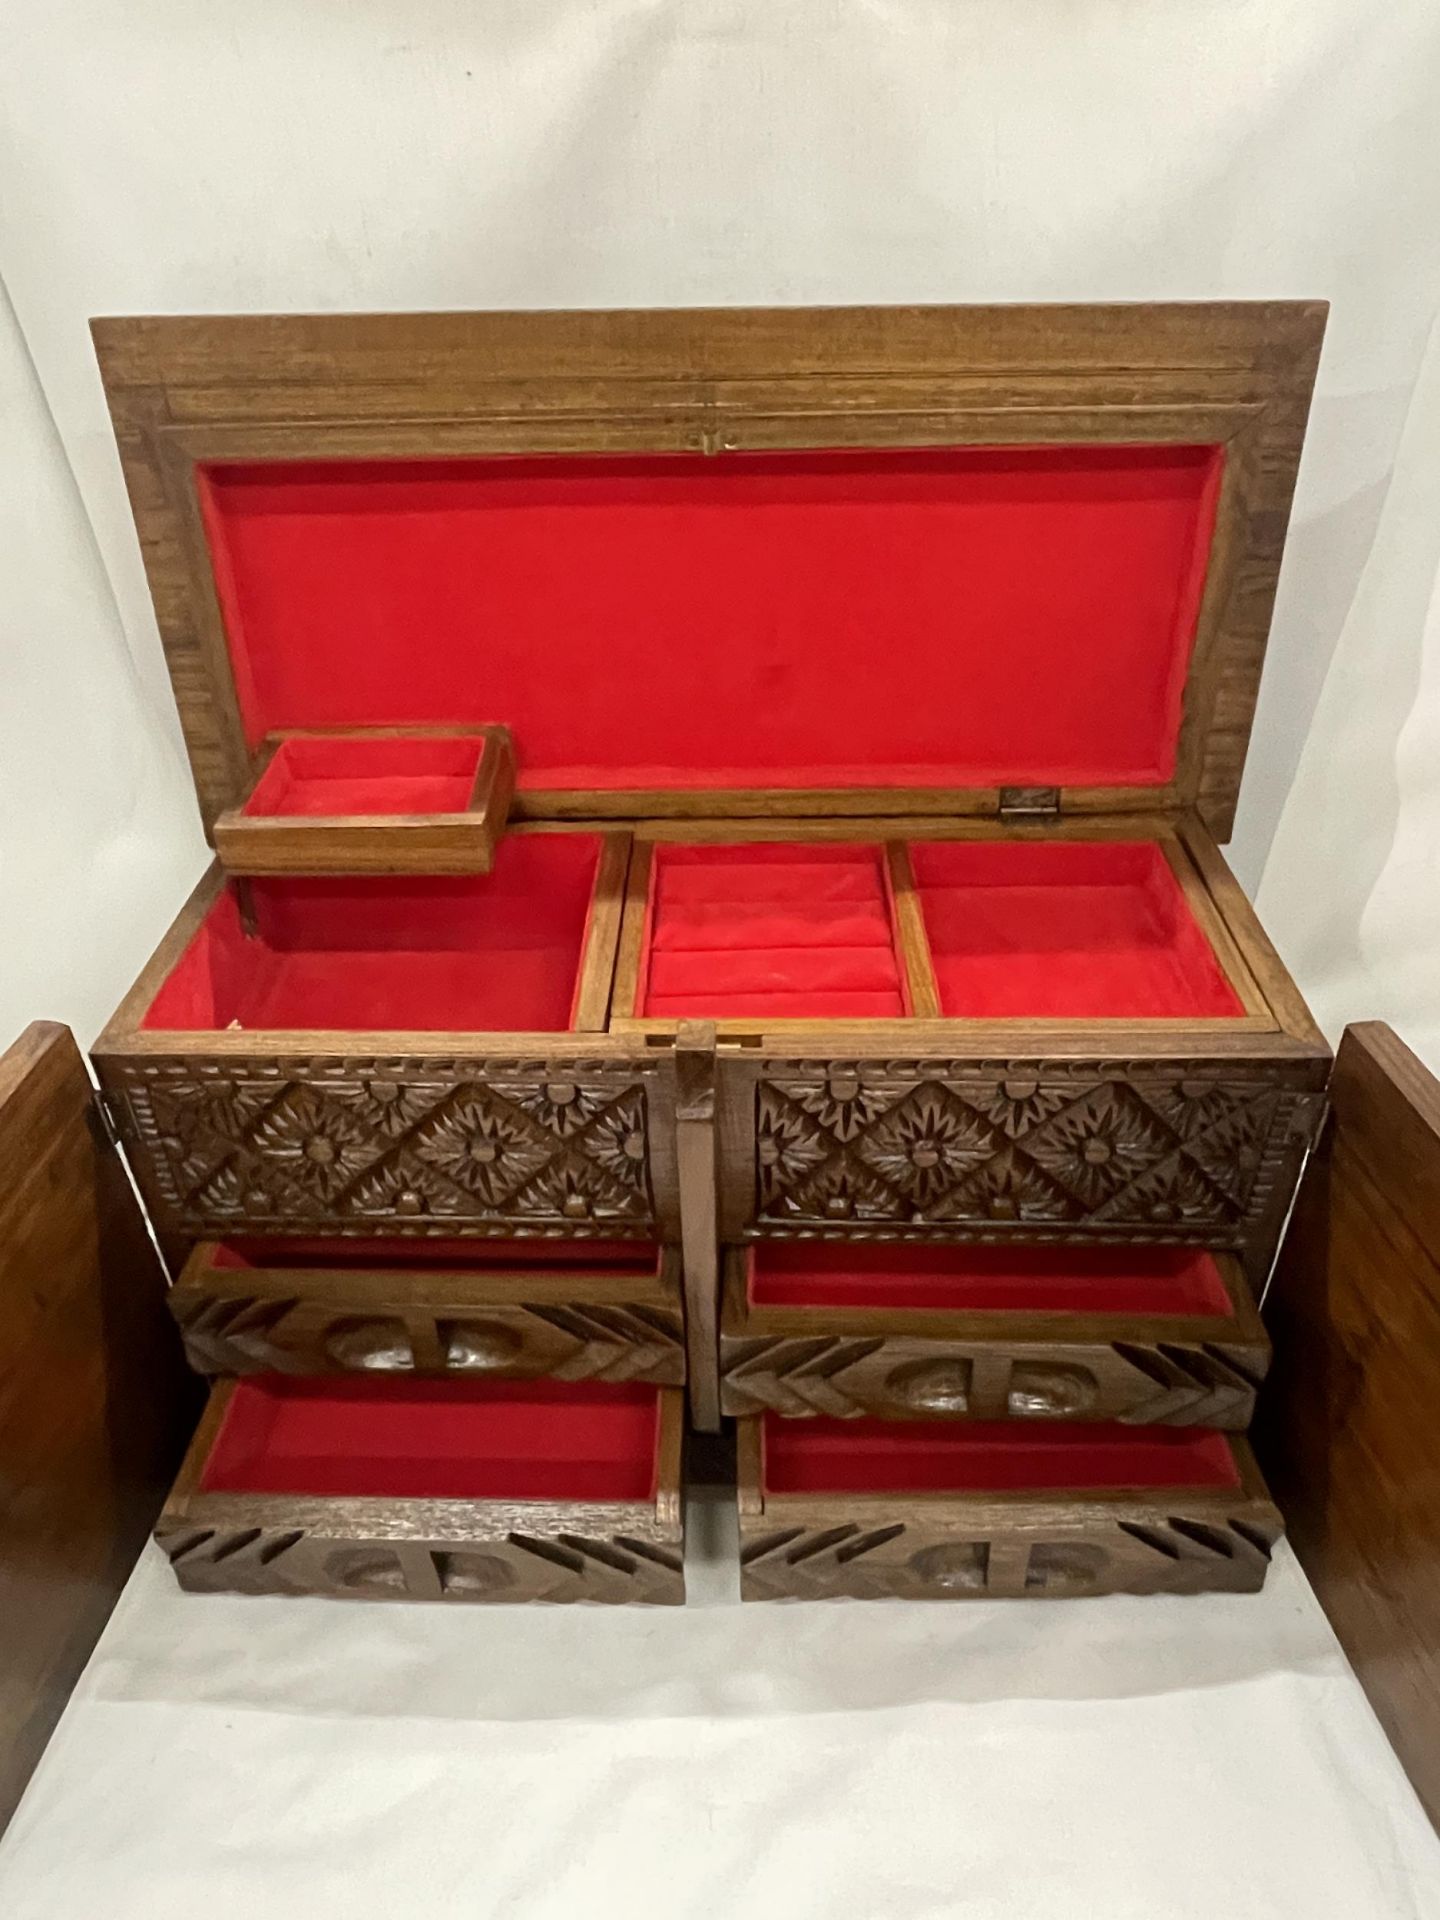 A HEAVILY CARVED JEWELLERY BOX WITH TWO DOORS REVEALING FOUR LINED DRAWERS AND A LIFT UP LID WITH - Image 4 of 4